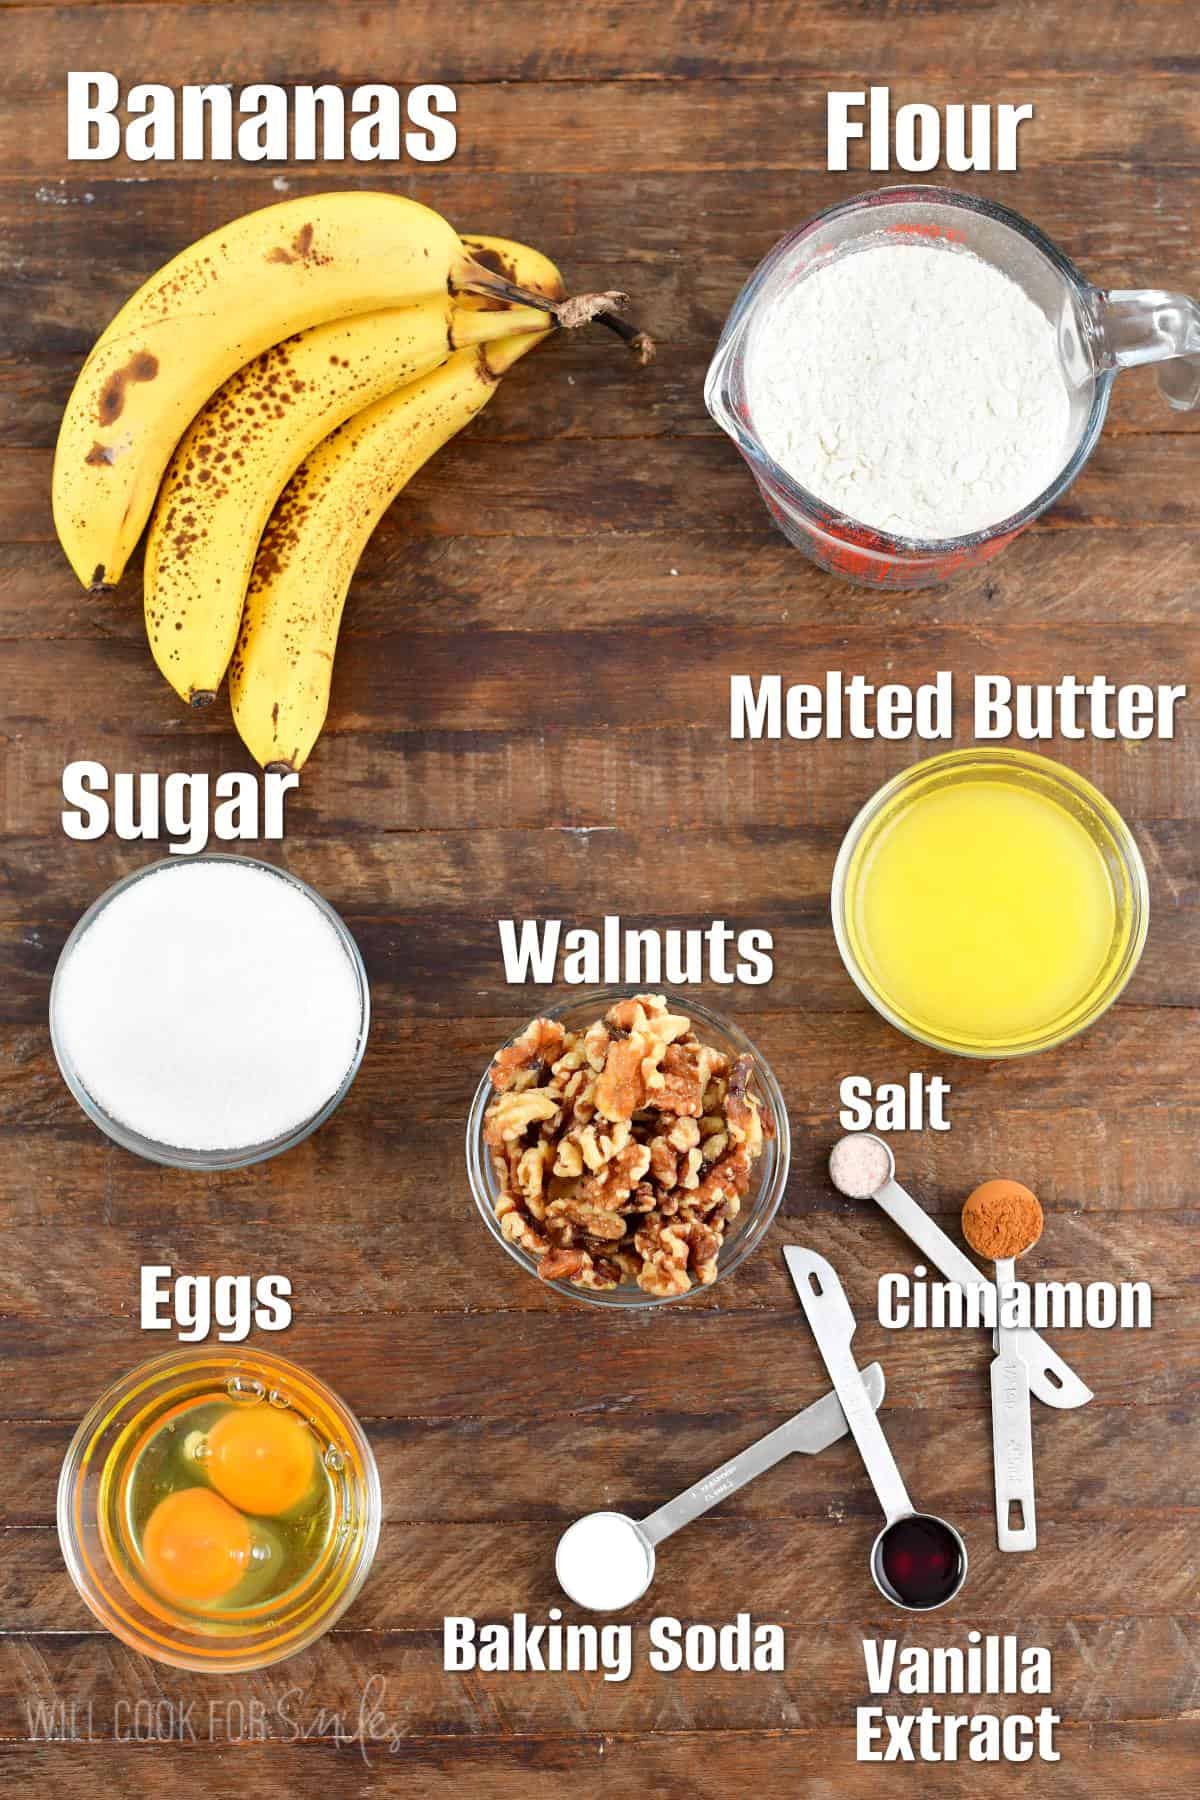 The ingredients for banana bread are spread out on a wooden surface. 